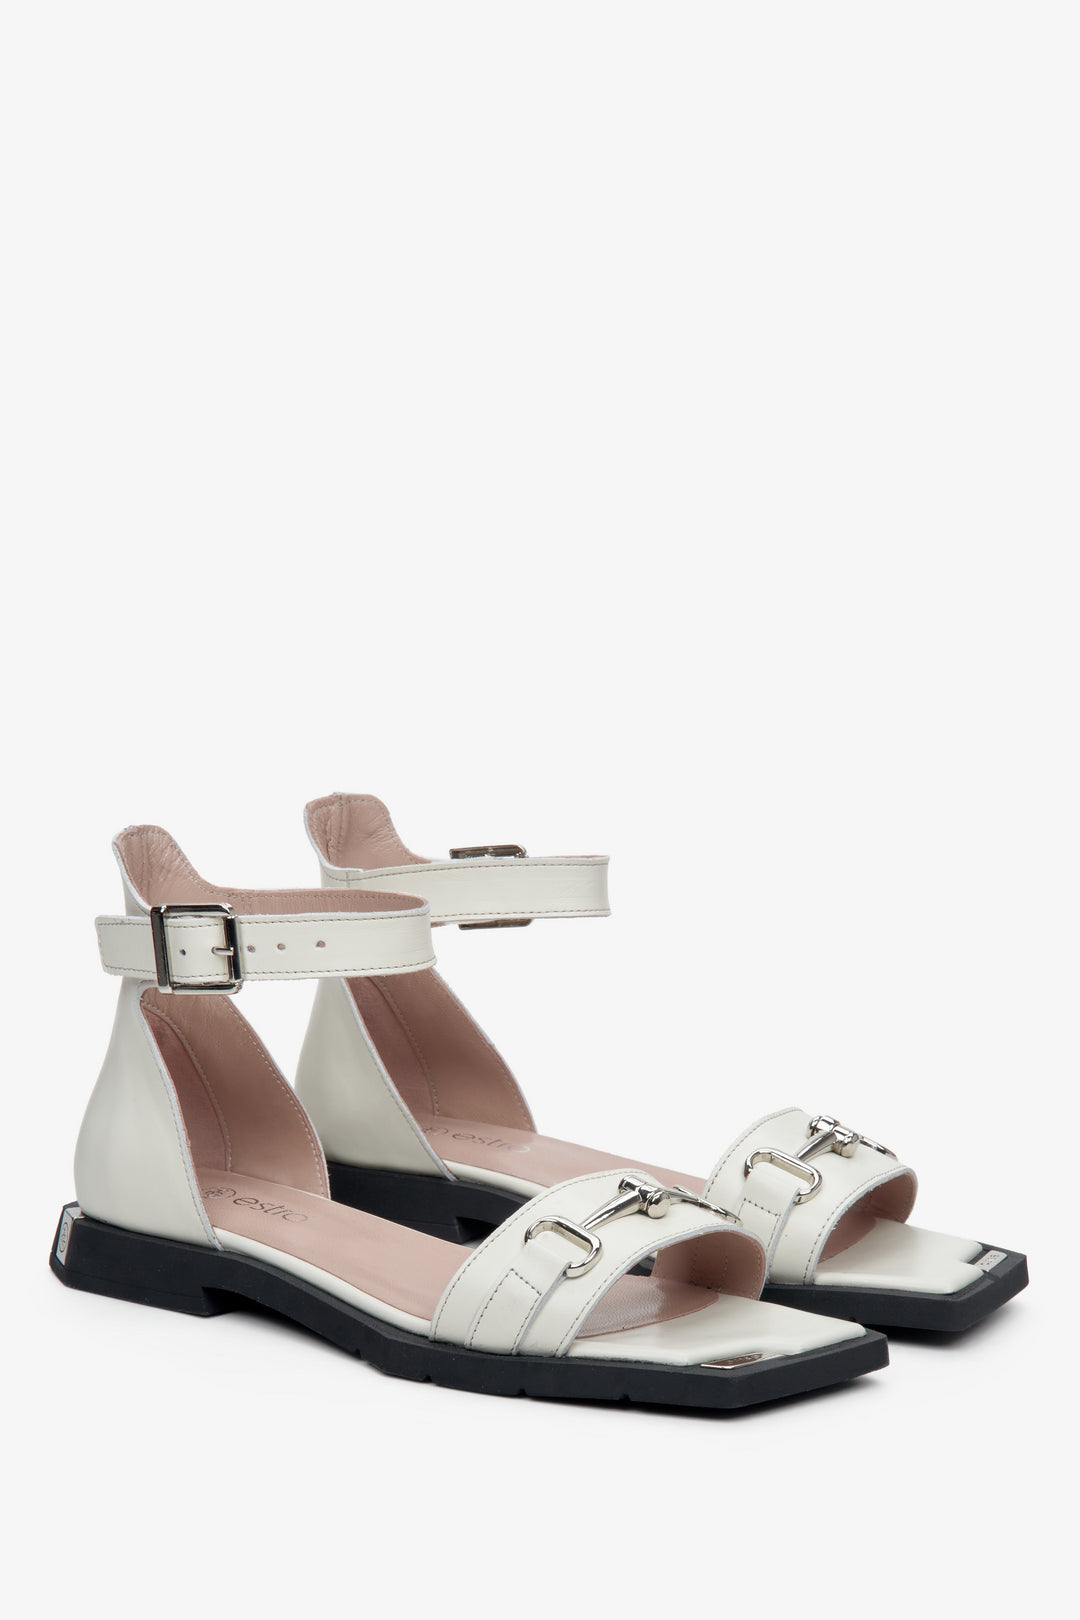 Women's beige sandals for summer by Estro - presentation of the toe.